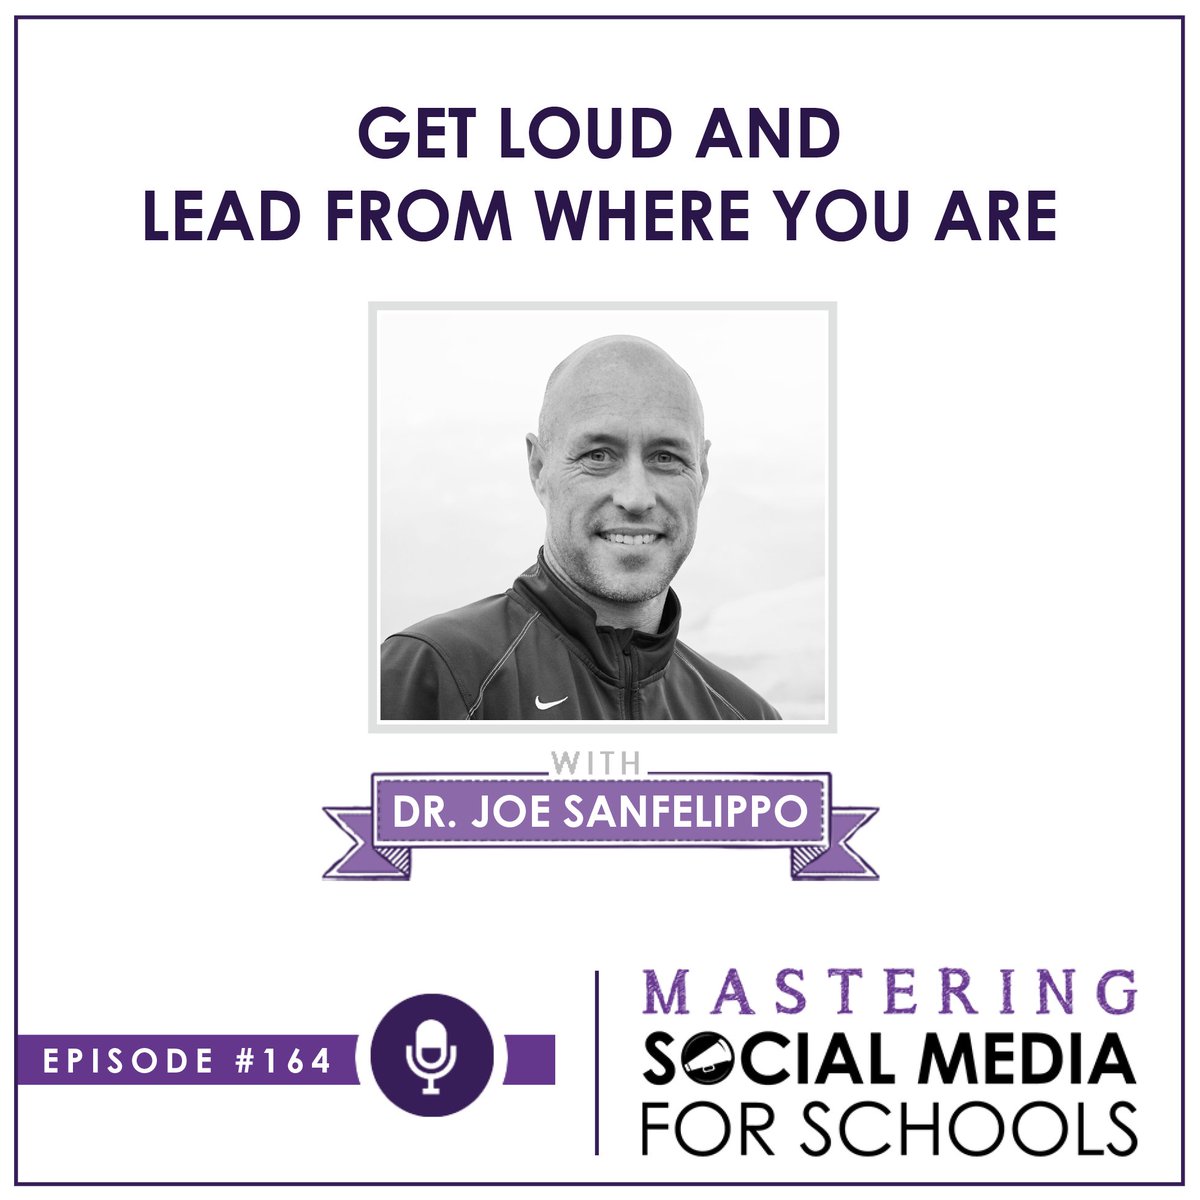 Dr. Joe Sanfelippo was my first mentor when I started this business, and so I'm thrilled to feature him on today's podcast! @Joe_Sanfelippo  @fccrickets

Listen here or wherever you get podcasts:
socialschool4edu.com/podcast/164/

#socialschool4edu #schoolpr #schoolleader